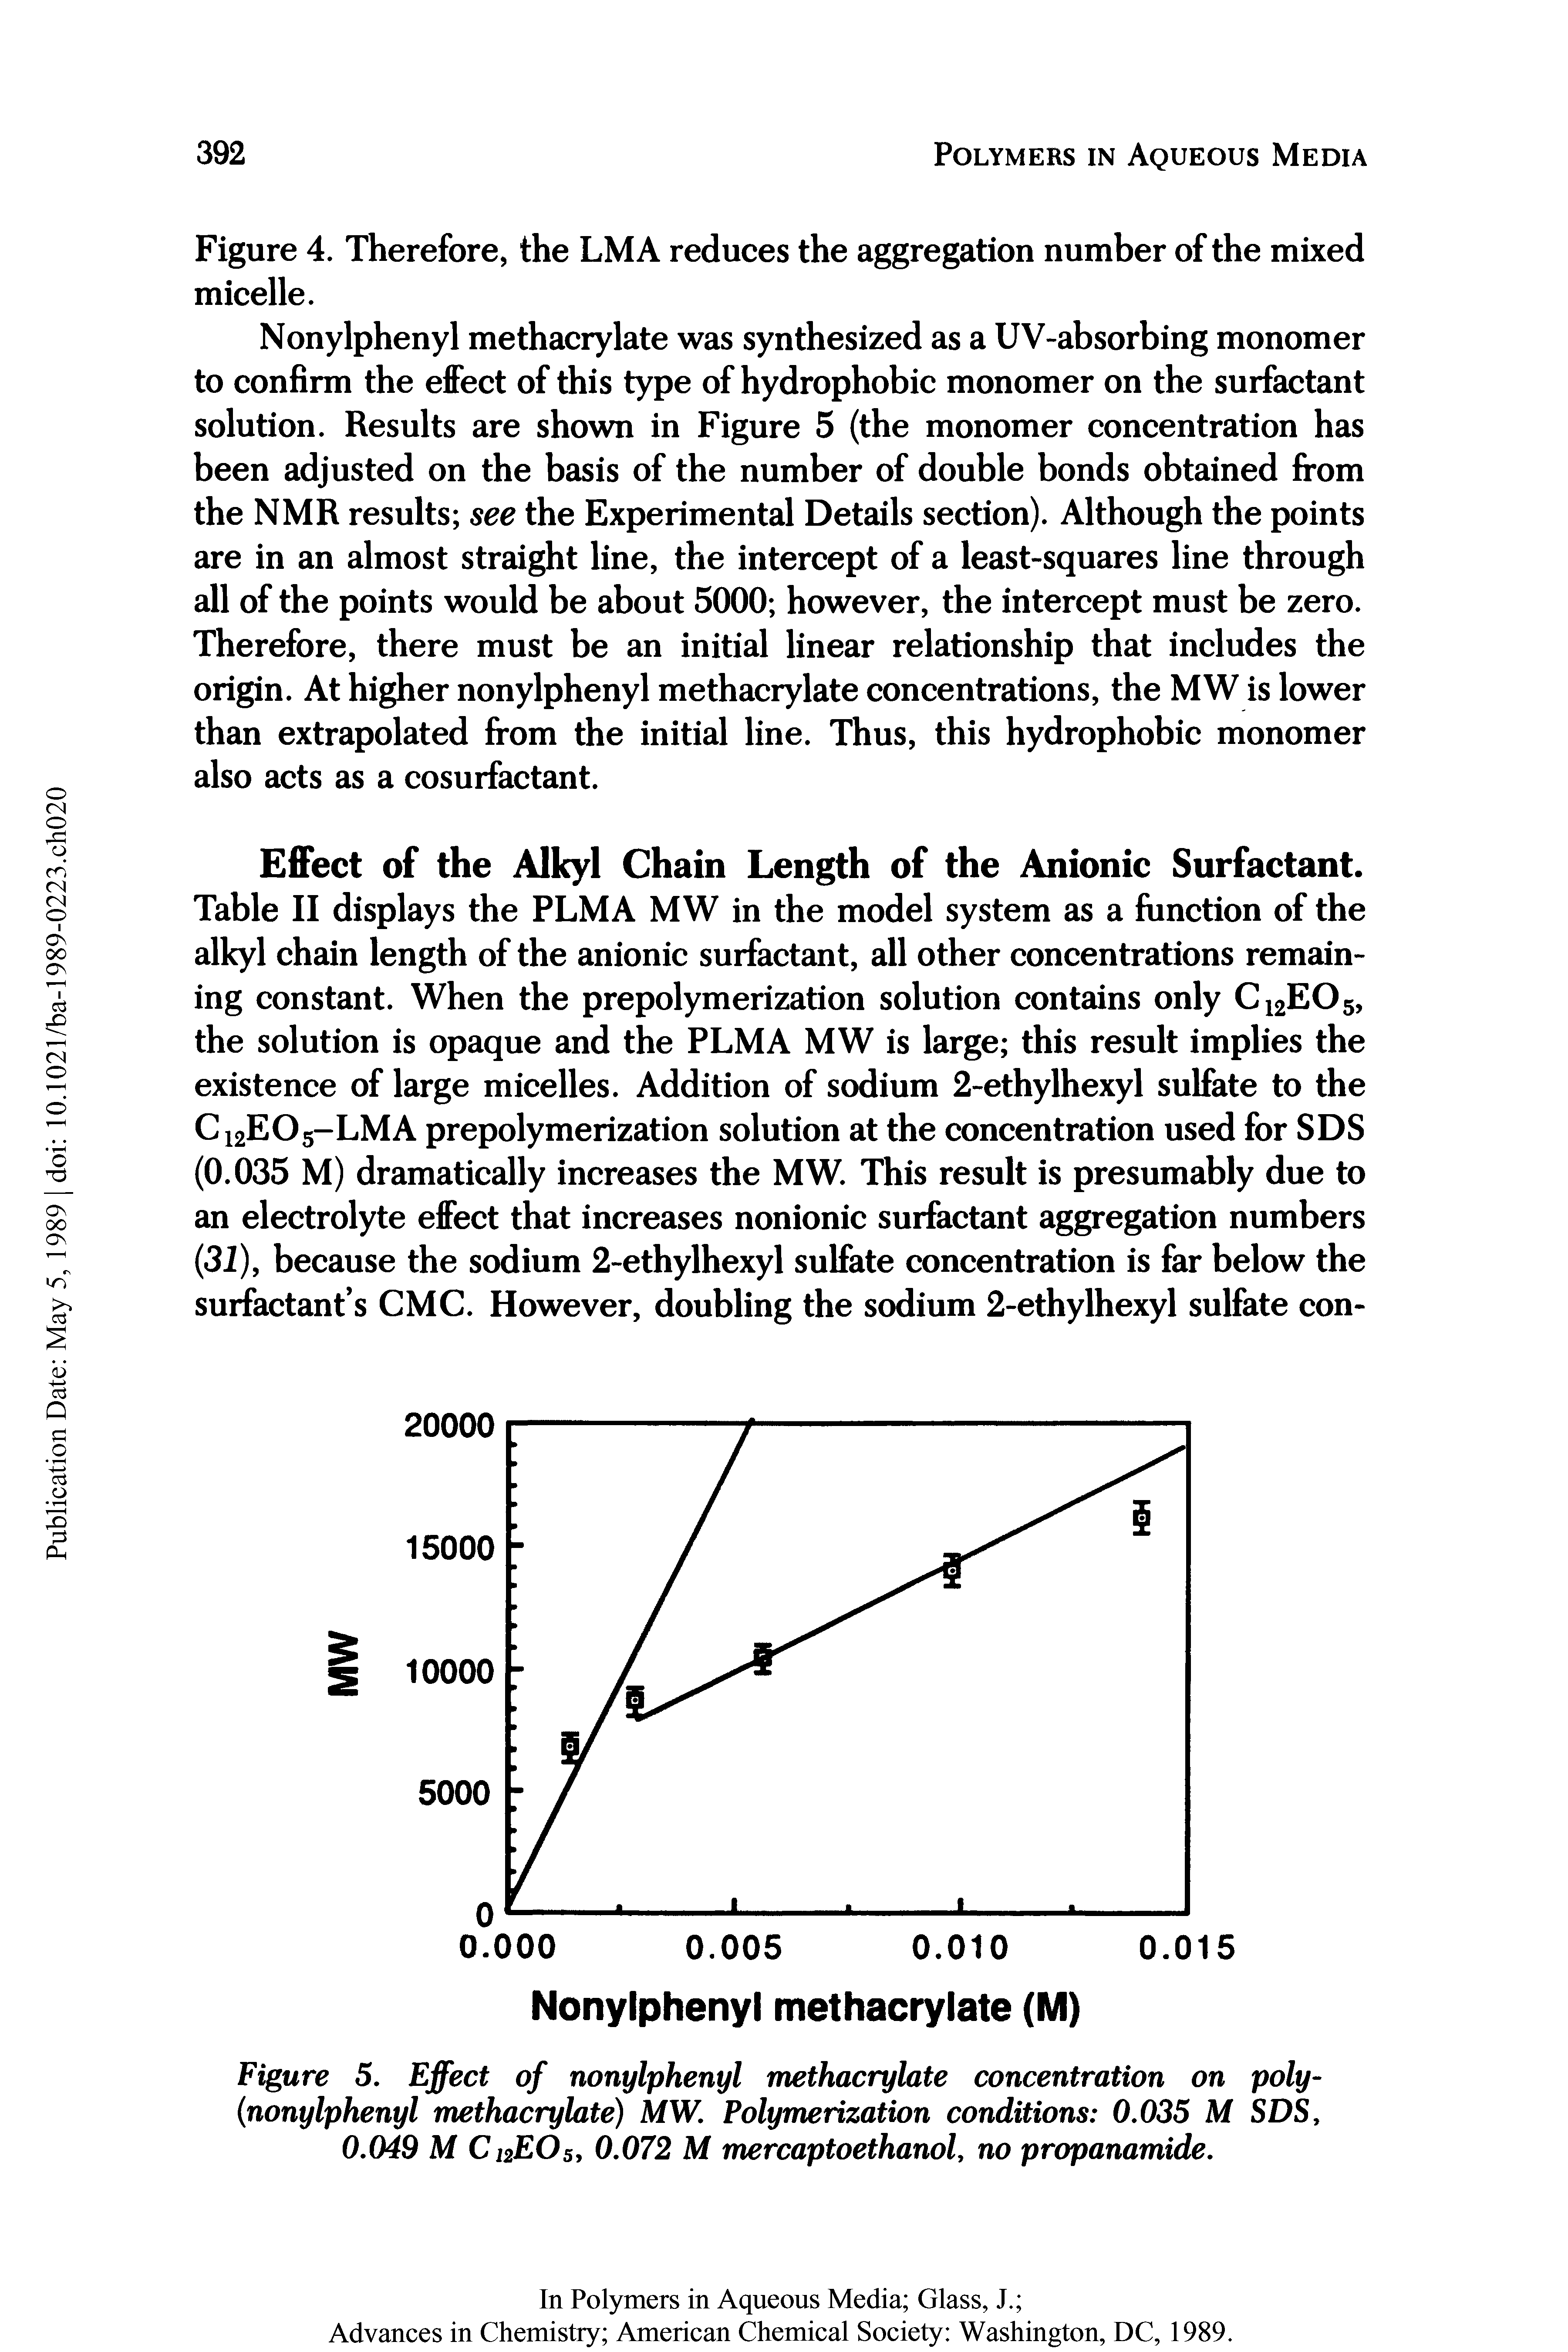 Table II displays the PLMA MW in the model system as a function of the alkyl chain length of the anionic surfactant, all other concentrations remaining constant. When the prepolymerization solution contains only C12EO5, the solution is opaque and the PLMA MW is large this result implies the existence of large micelles. Addition of sodium 2-ethylhexyl sulfate to the C12EO5-LMA prepolymerization solution at the concentration used for SDS (0.035 M) dramatically increases the MW. This result is presumably due to an electrolyte effect that increases nonionic surfactant aggregation numbers (3i), because the sodium 2-ethylhexyl sulfate concentration is far below the surfactant s CMC. However, doubling the sodium 2-ethylhexyl sulfate con-...